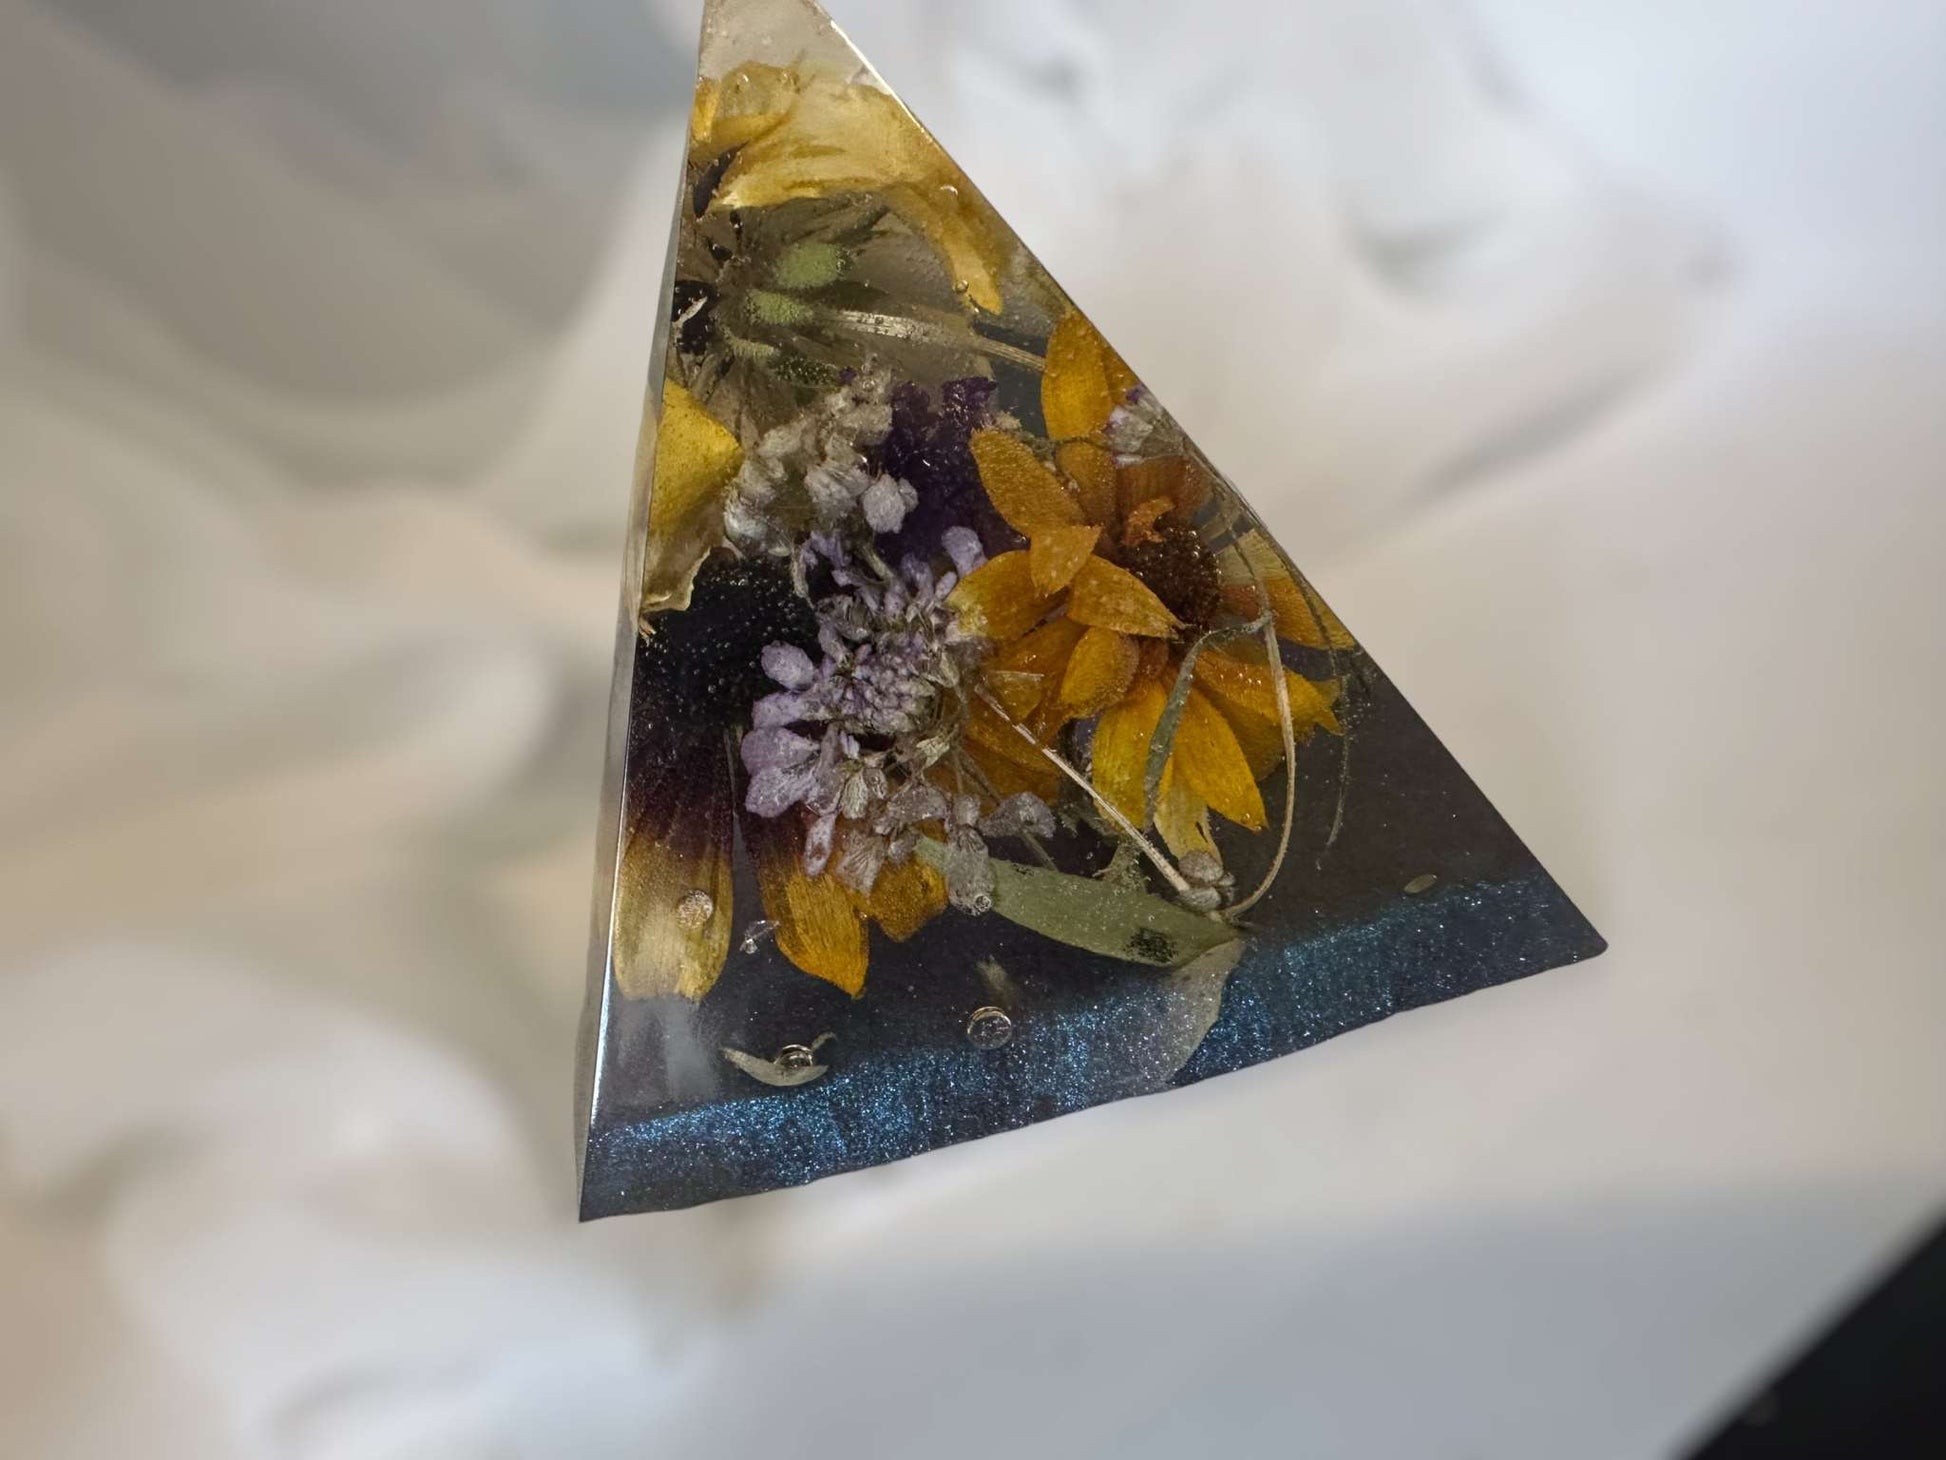 Pyramid - Dragonfly and Flower Resin Pyramid: Nature's Garden